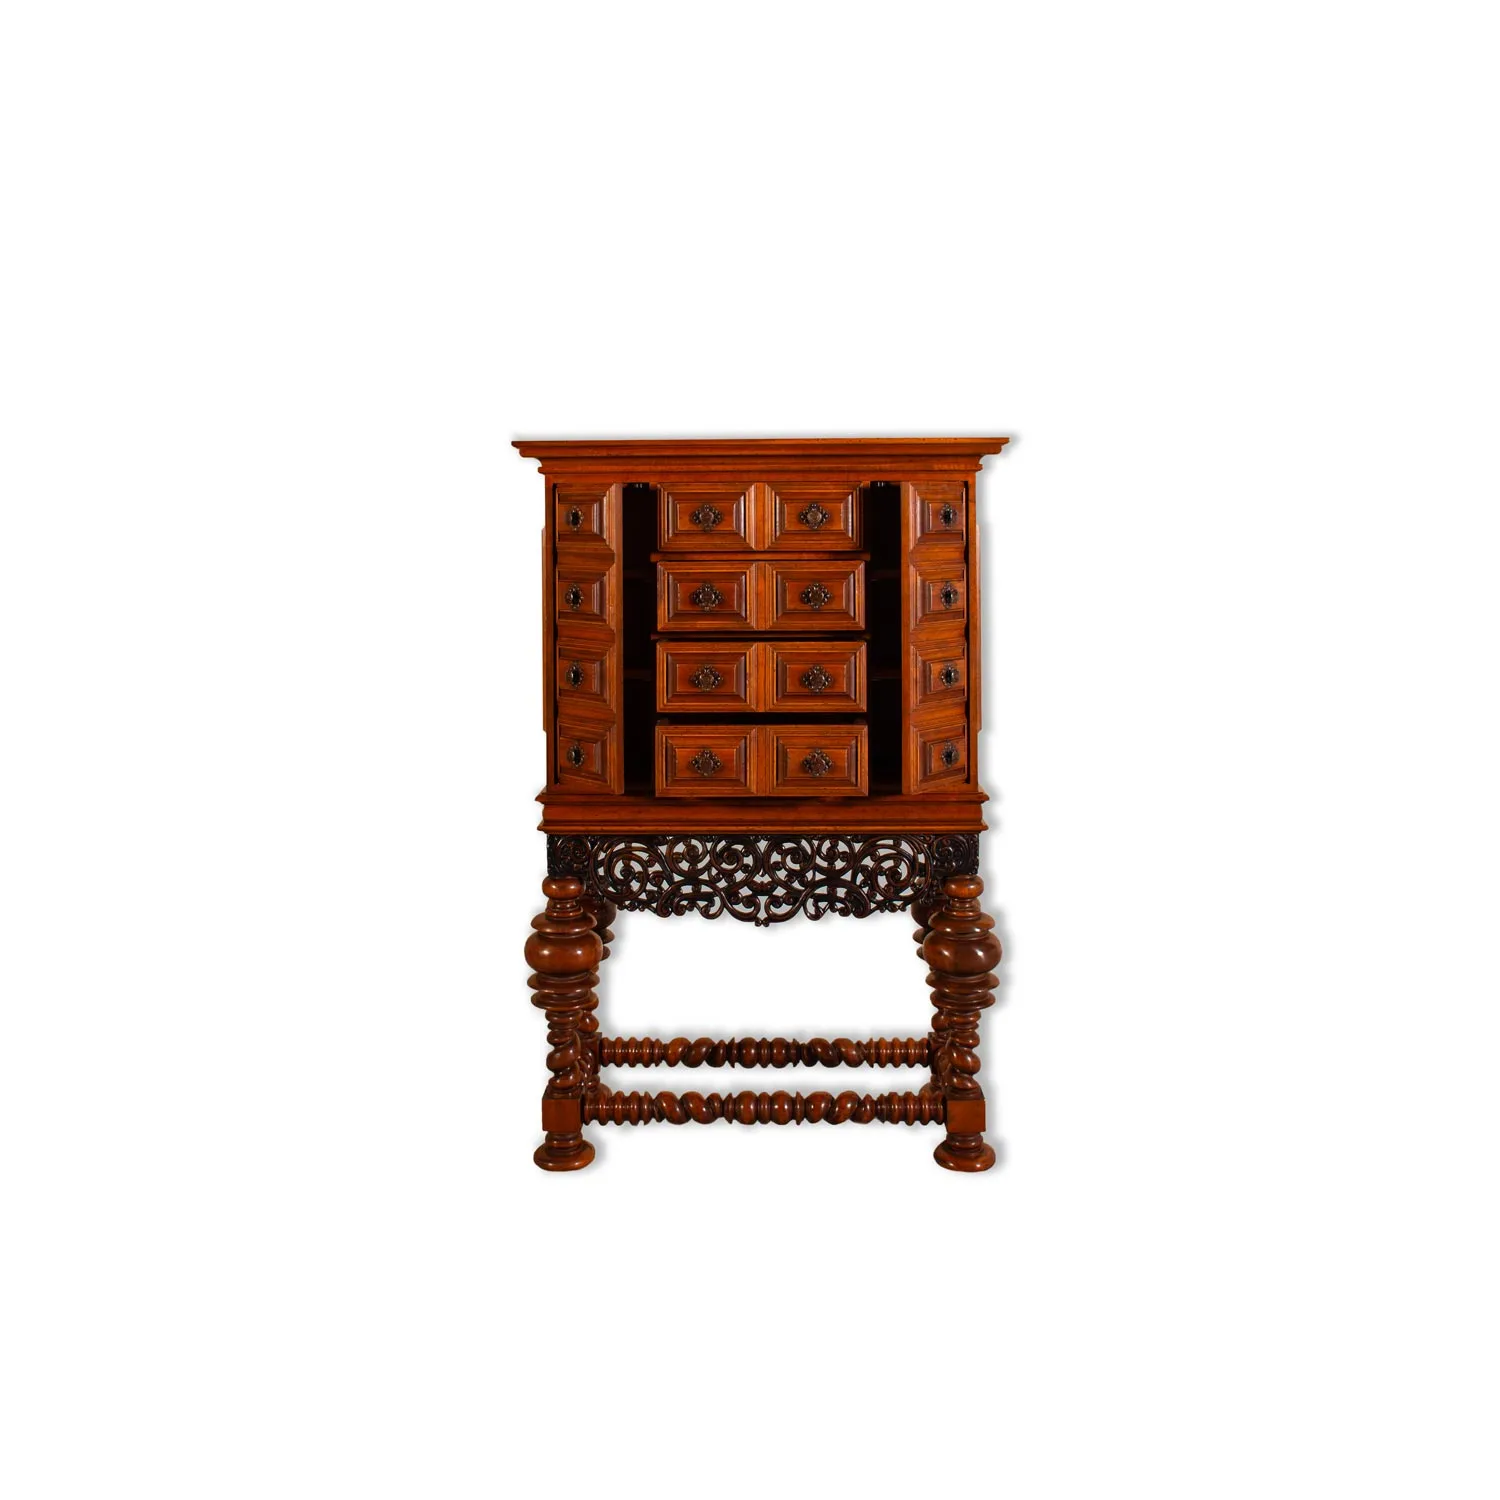 Cabinet in English style